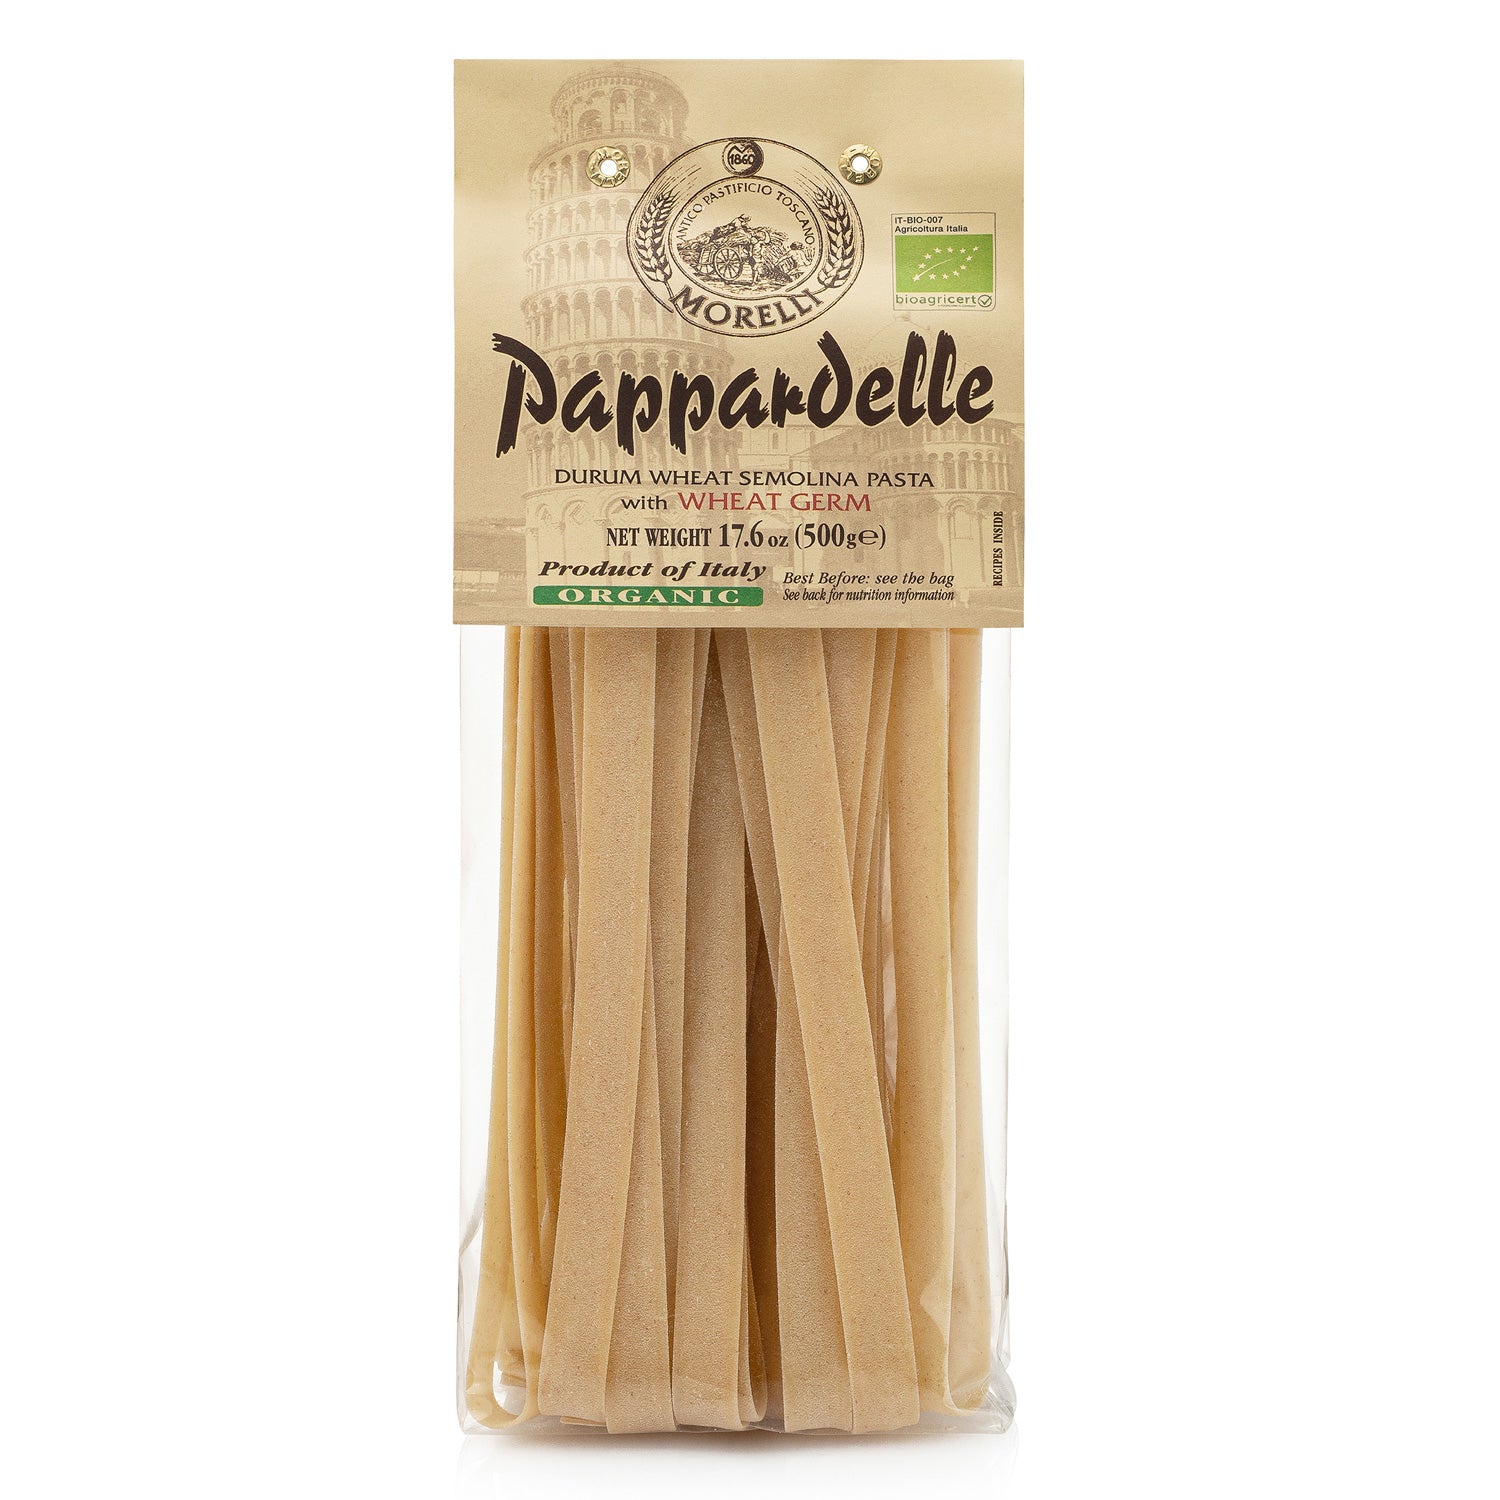 Organic Pappardelle Pasta - Gourmet Pasta From Italy by Morelli